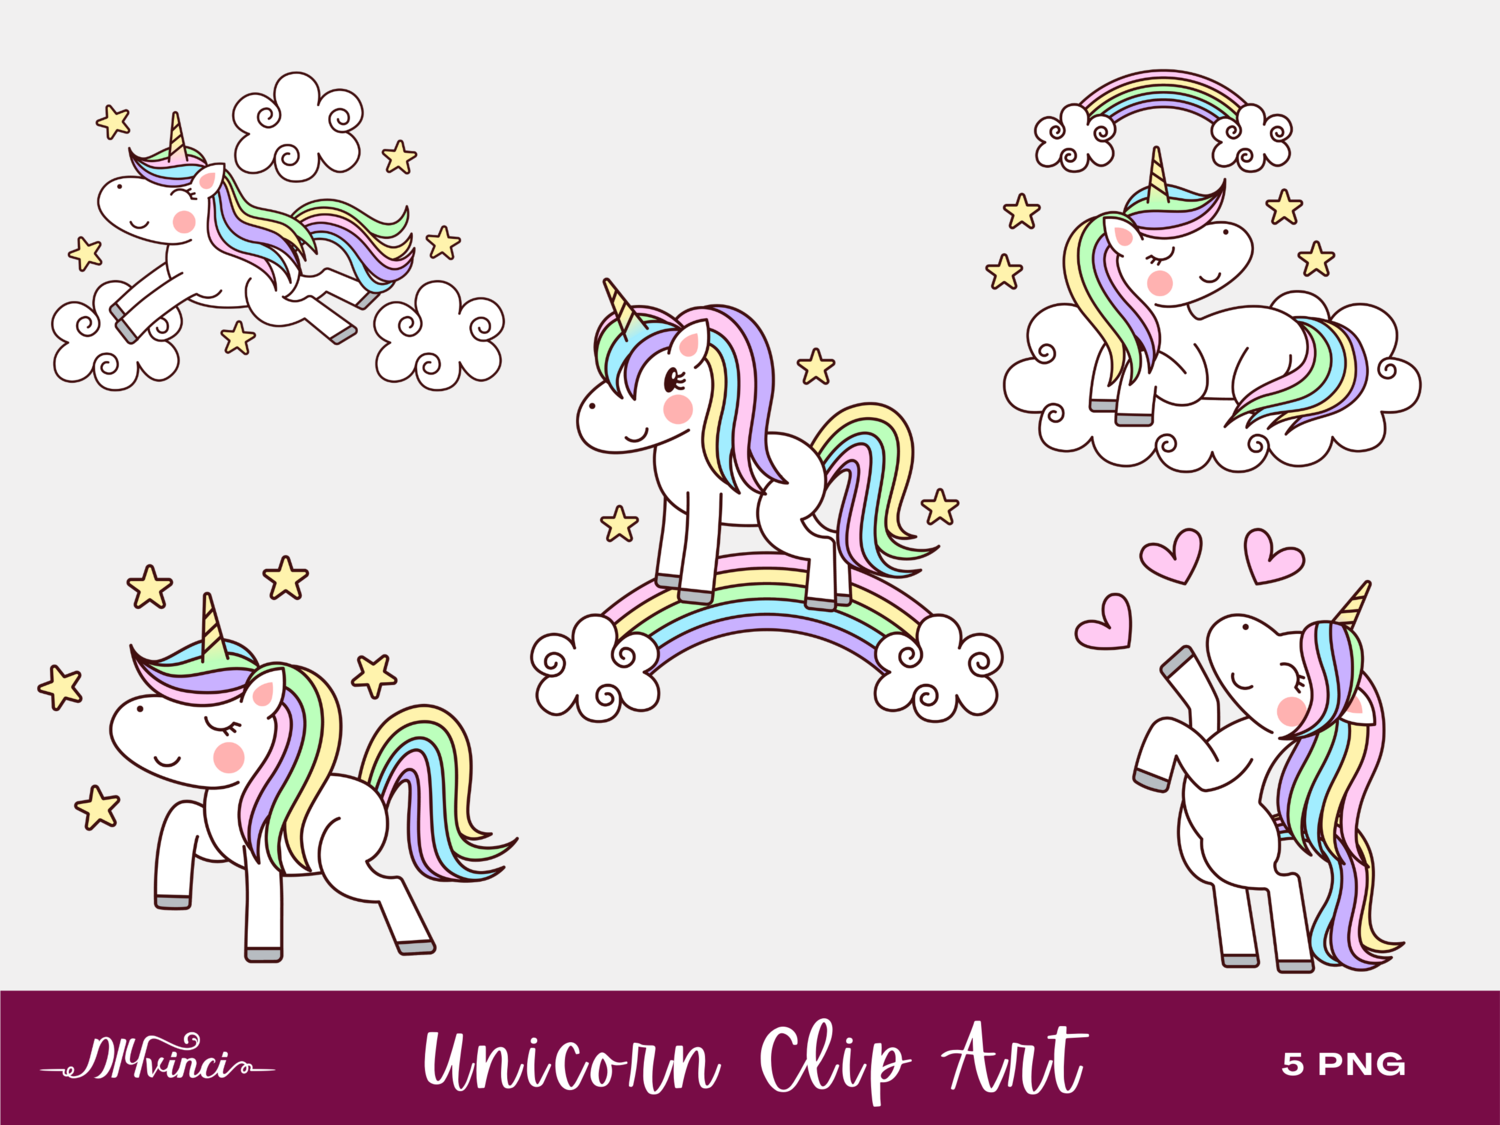 5 Unicorn Clip Art - PNG - Personal & Commercial Use